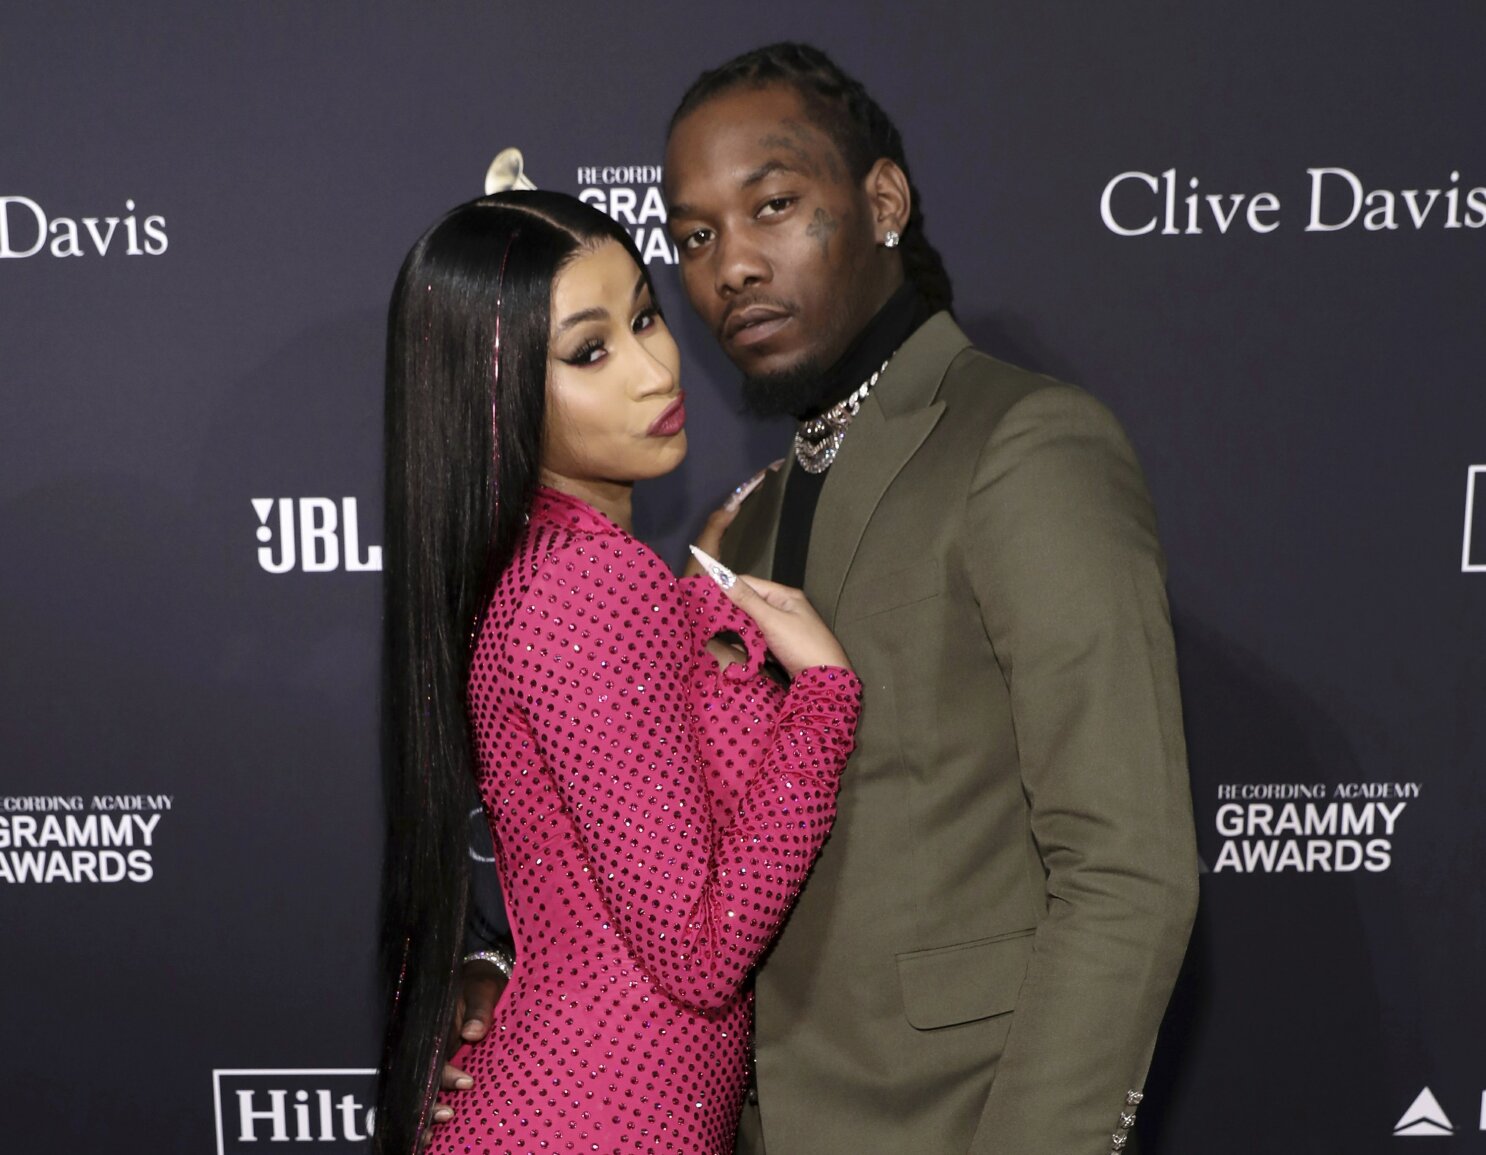 Remedy Blog on Instagram: Cardi B and husband Offset give